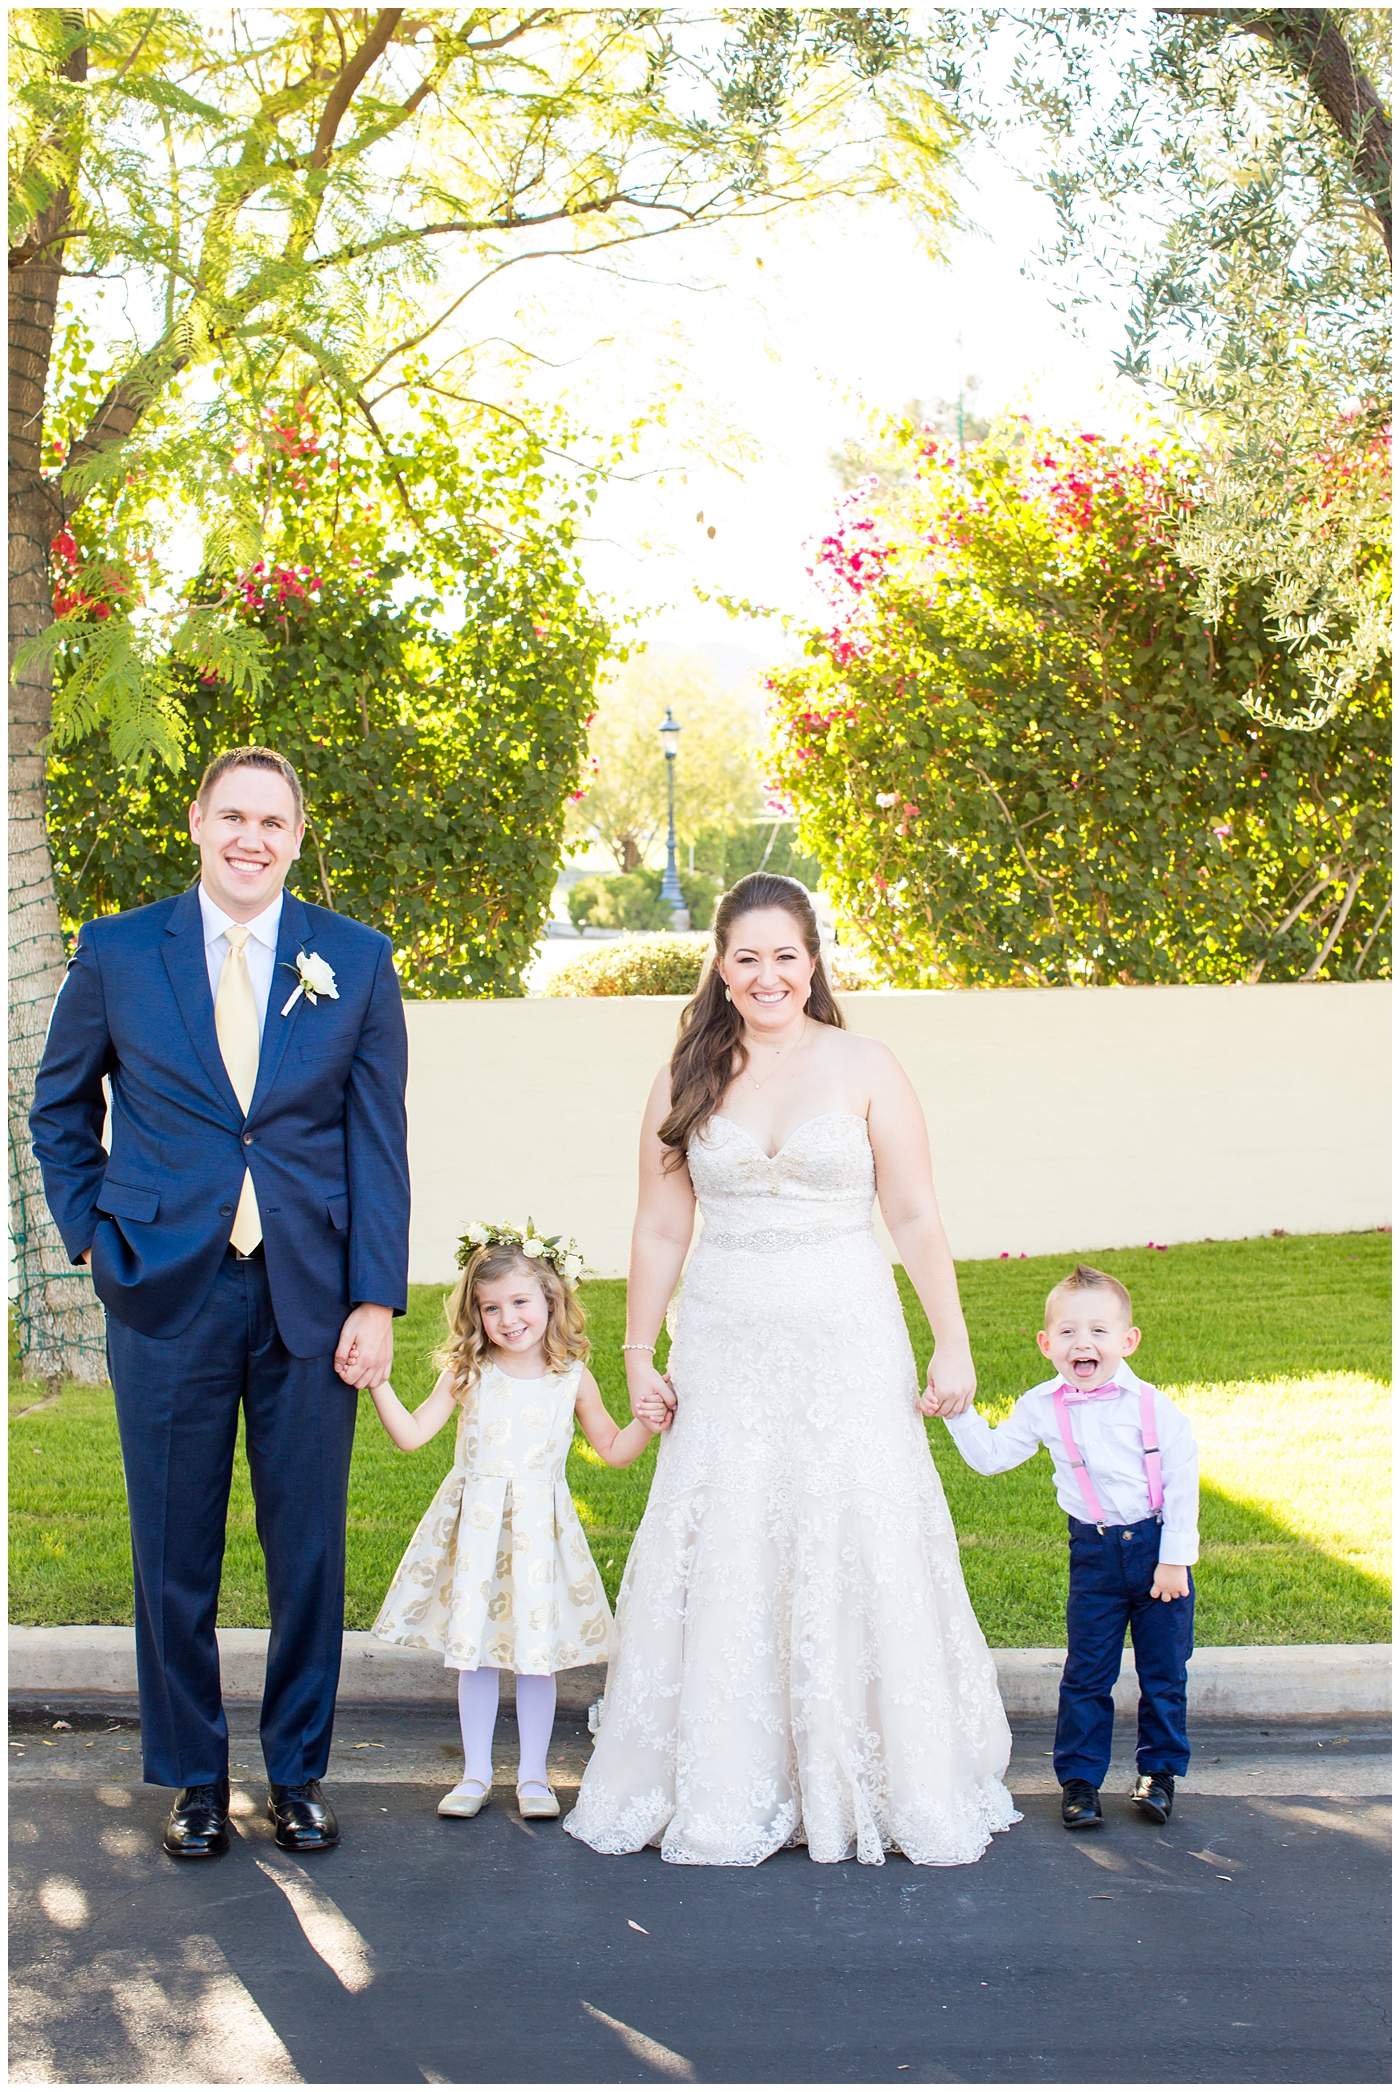 bride in lillian lottie couture wedding dress with white rose bouquet and groom in navy blue suit from men's warehouse bride and groom with flower girl wearing flower crown and ring bearer in suspenders